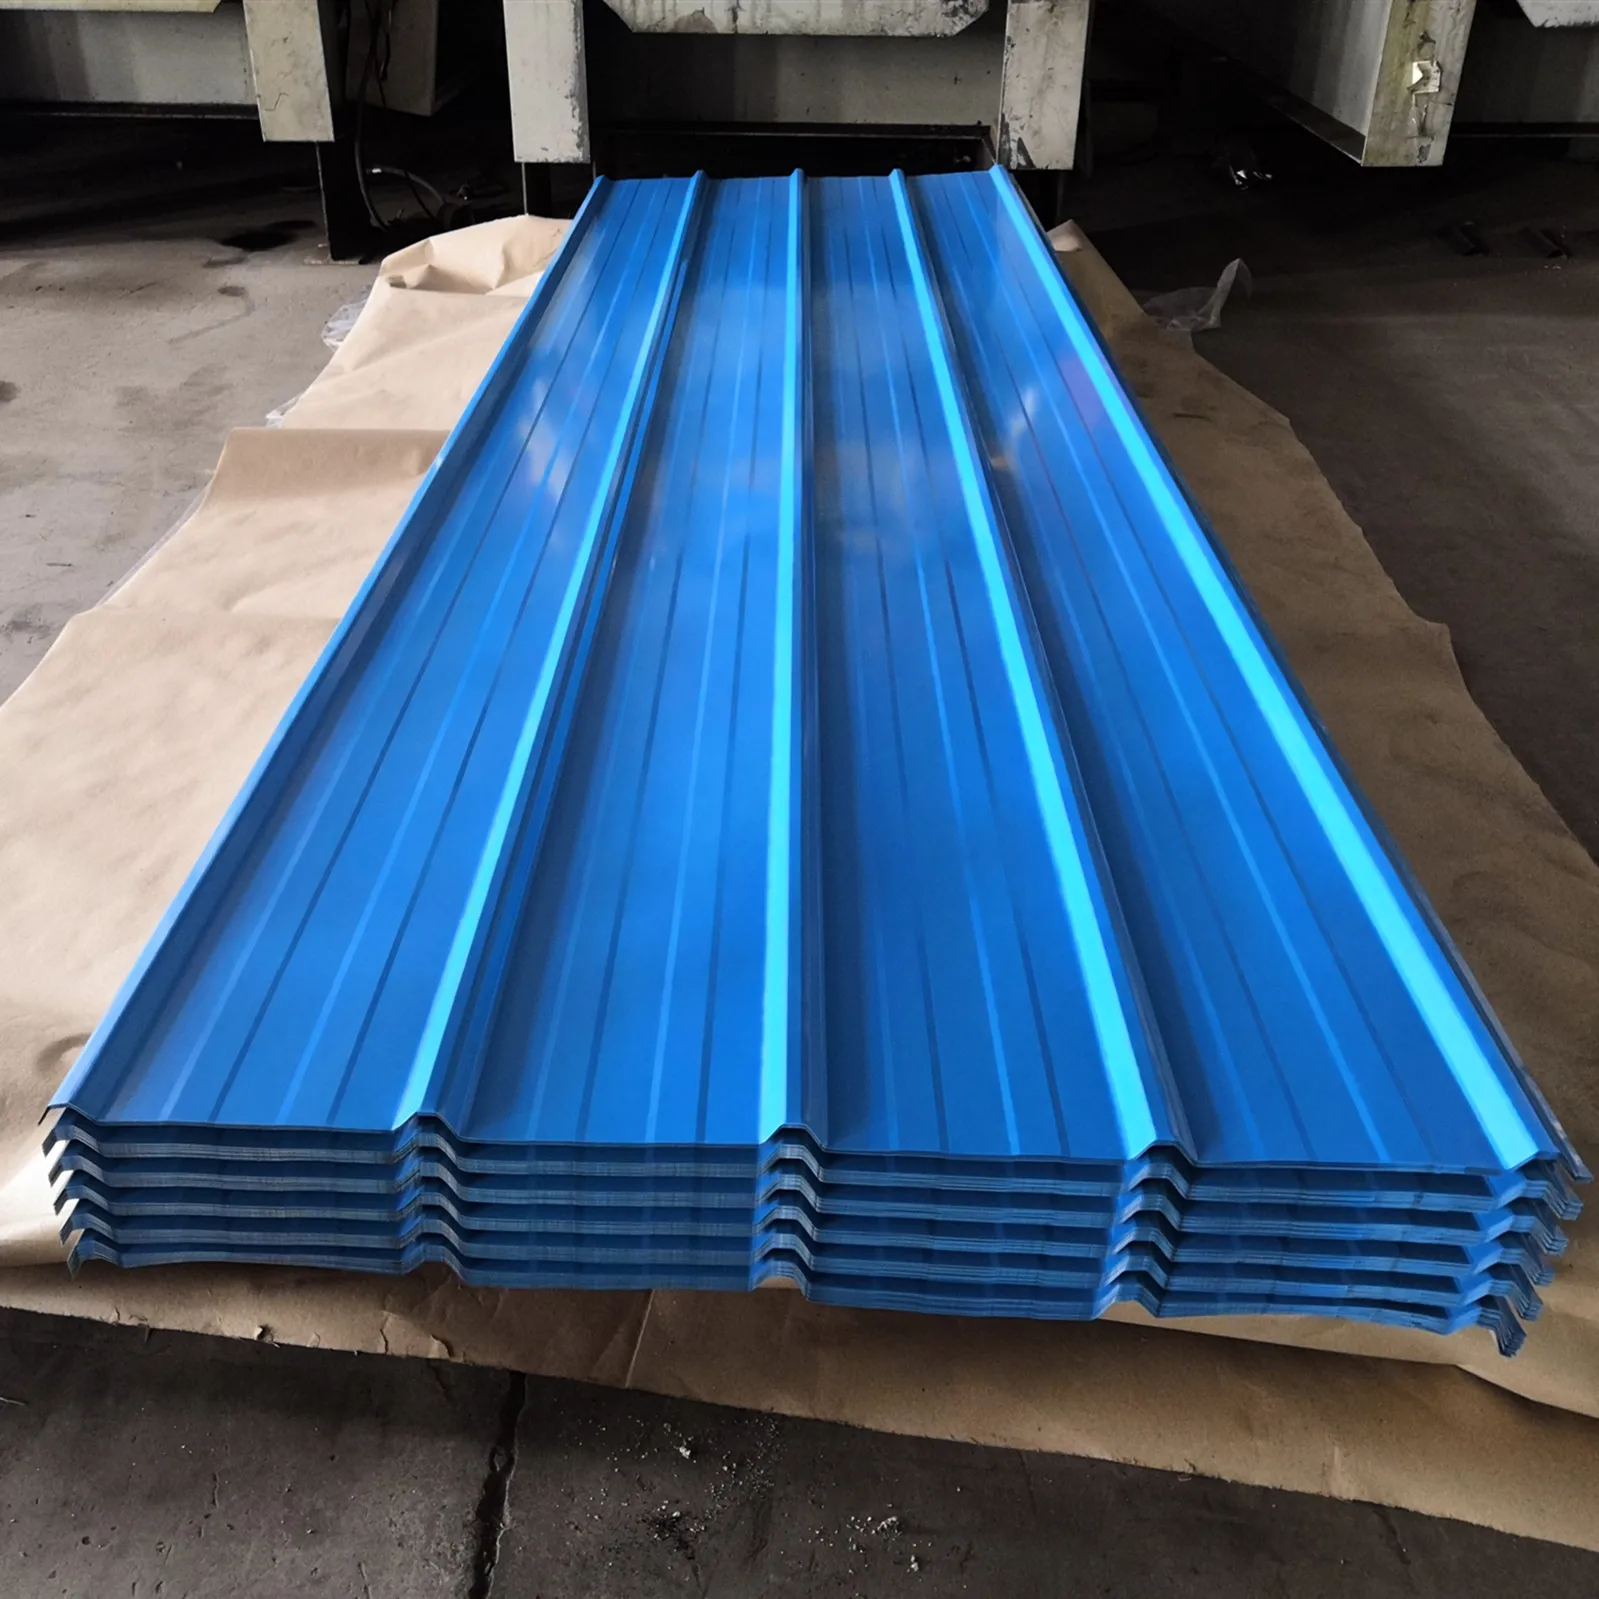 Roofing Iron Sheets Hot Sale In Fiji/ Galvanized Sheet Metal Price Buy Roofing Iron Sheets